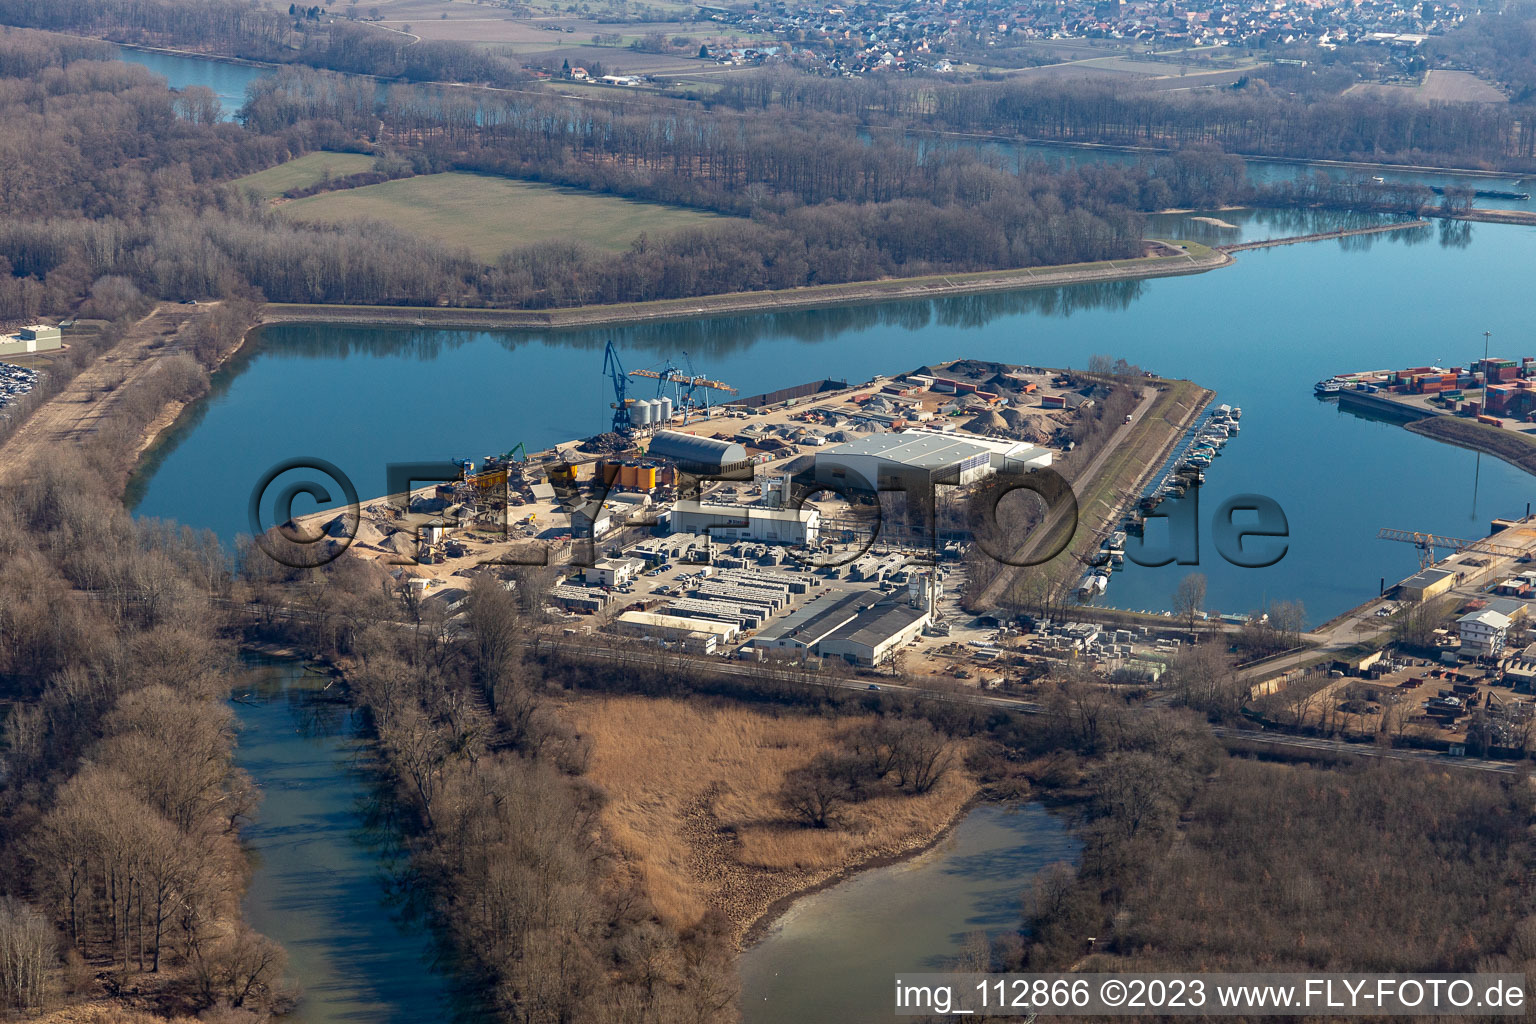 Quays and boat moorings at the port of the inland port of the Rhine river in Germersheim in the state Rhineland-Palatinate, Germany